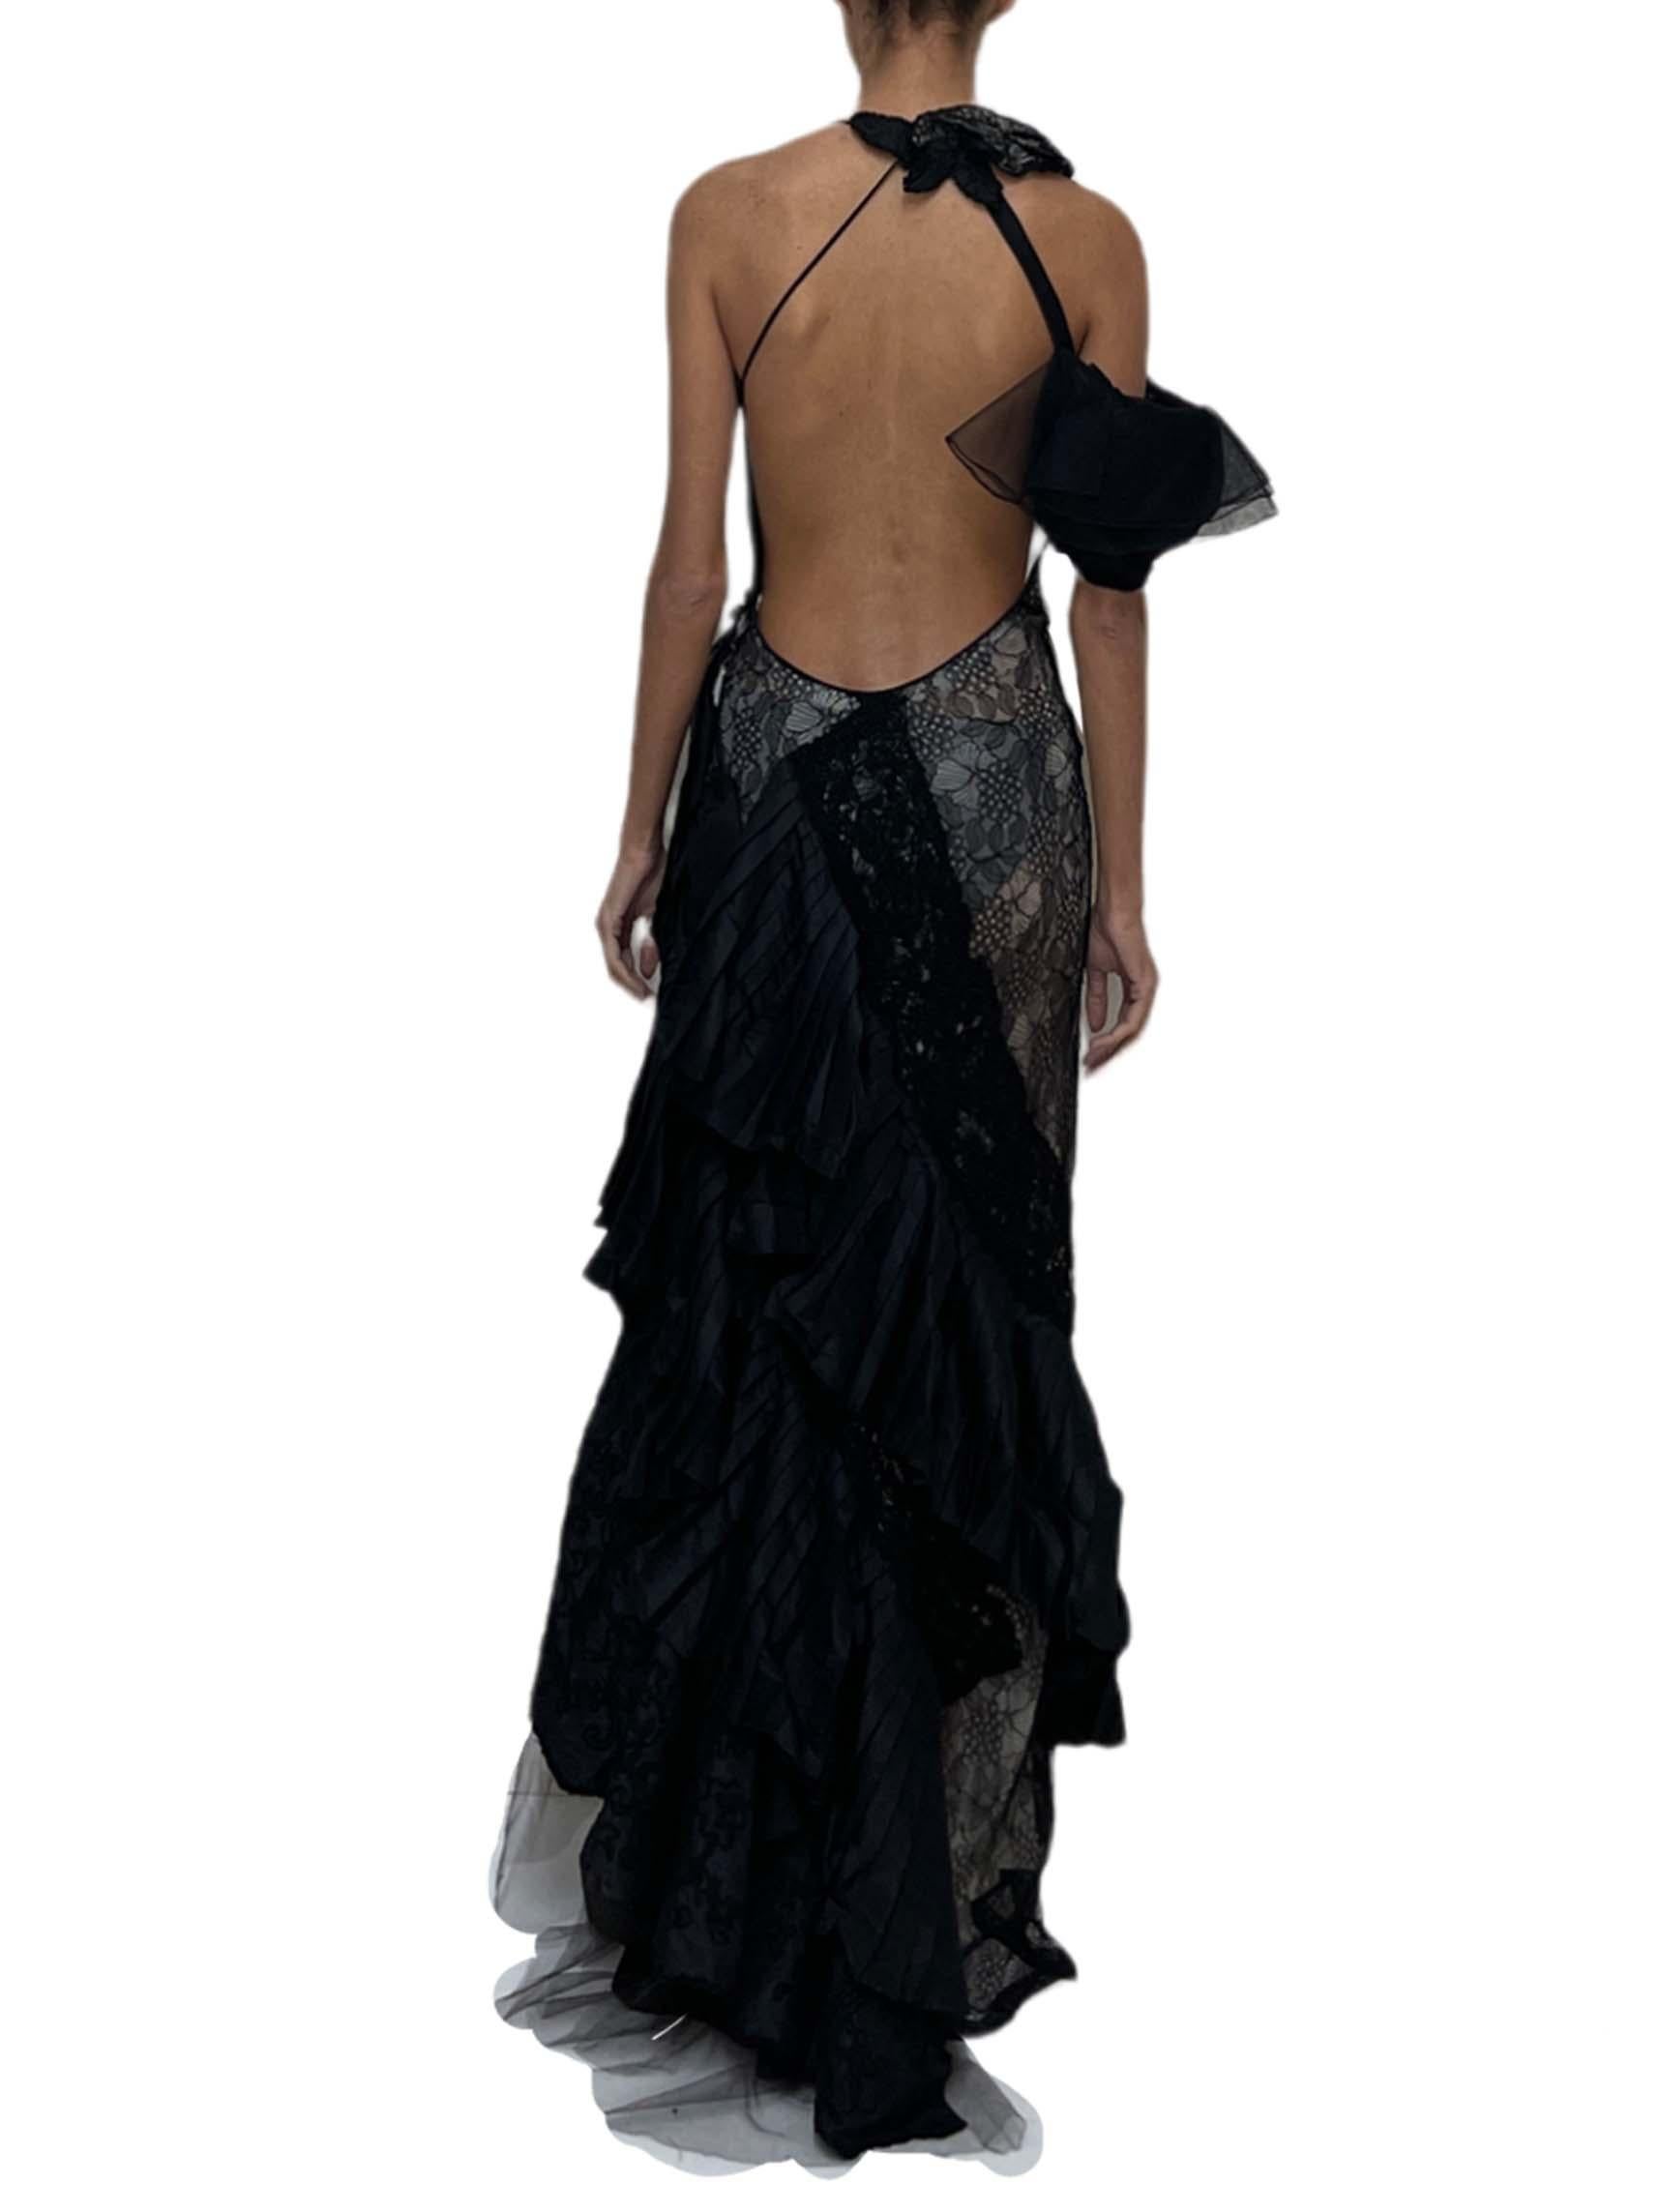 MORPHEW ATELIER Black & White Antique Lace Silk Taffeta Backless Ruffled Gown For Sale 5